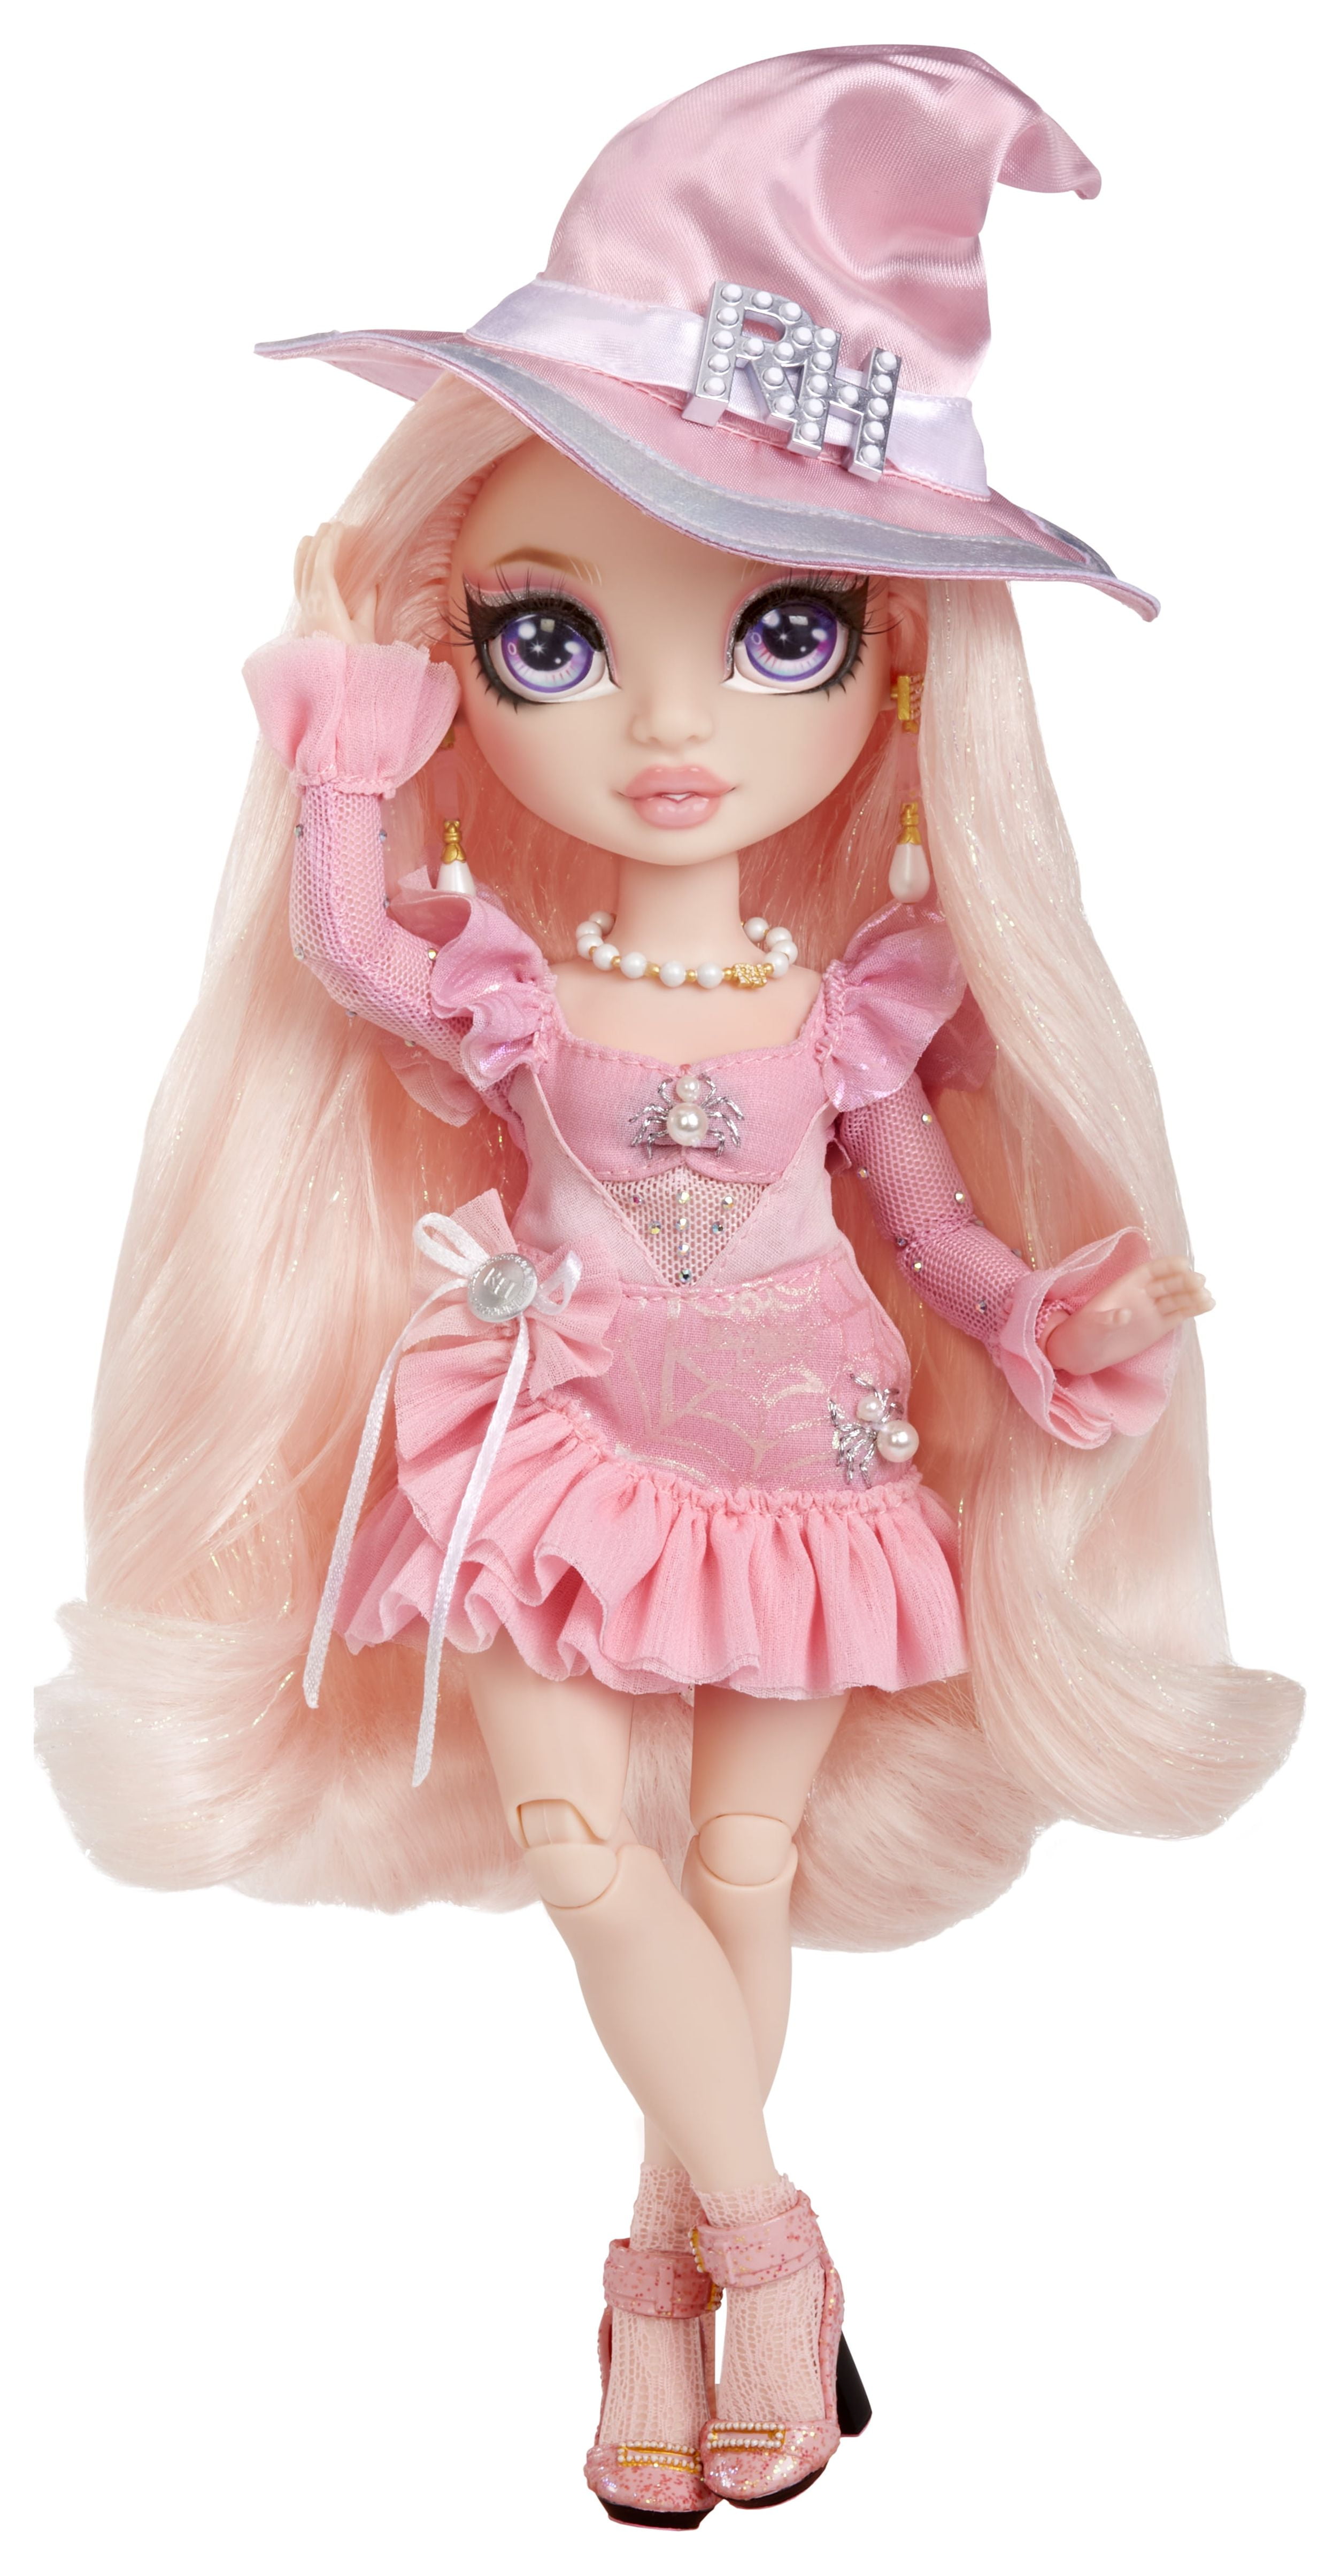 Rainbow Vision COSTUME BALL Rainbow High – Bella Parker (Pink) Fashion  Doll. 11 inch Witch Costume and Accessories. Great Gift for Kids 6-12 Years  Old & Collectors